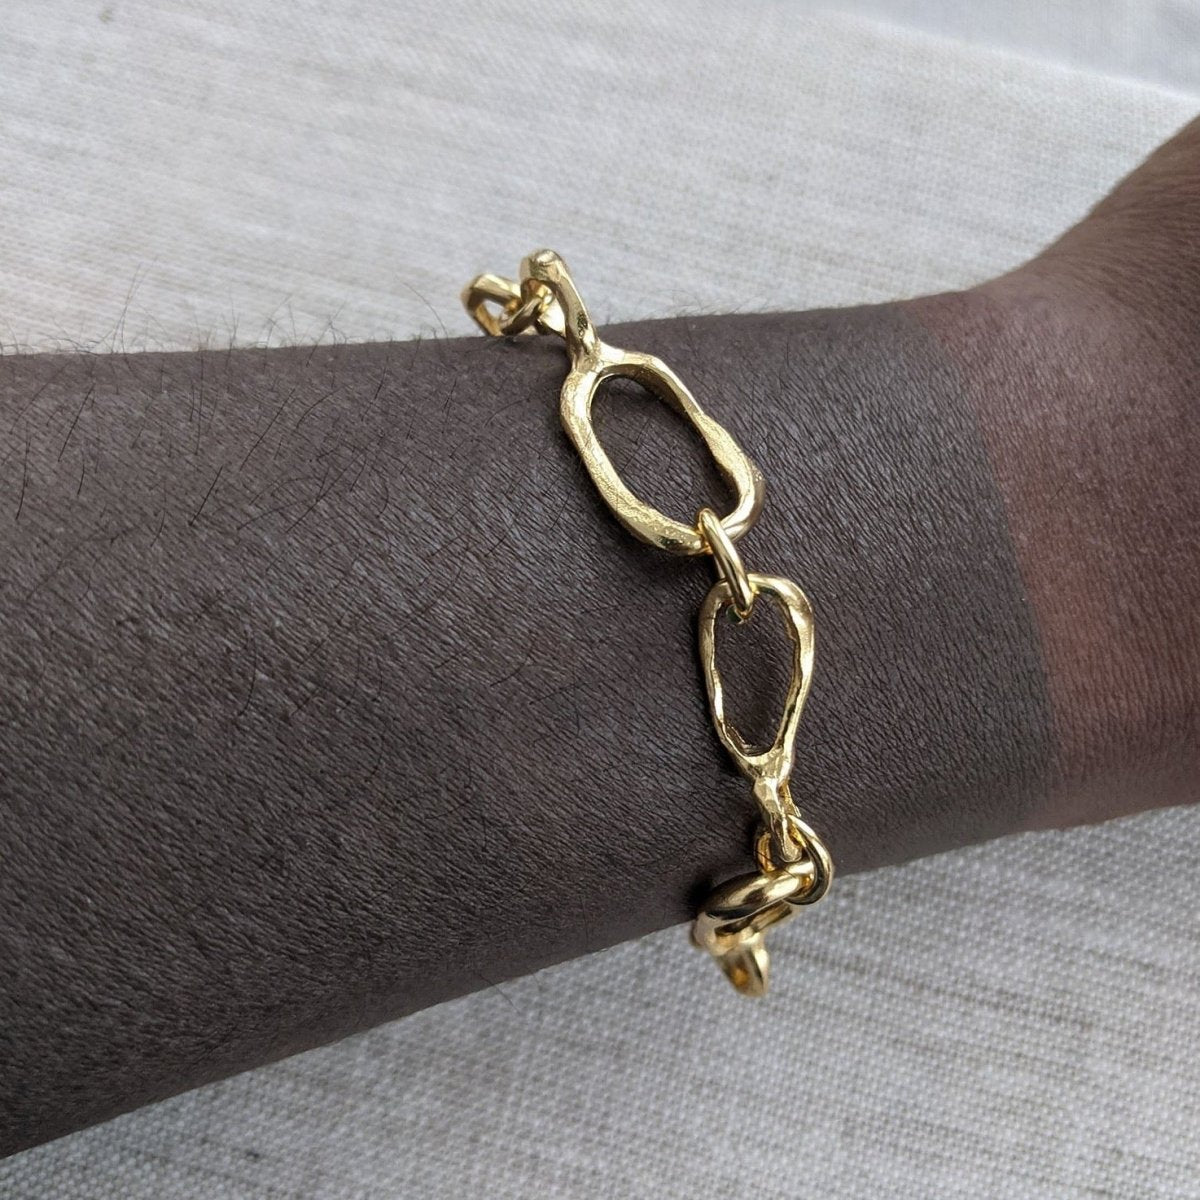 A model wears a linked 22 kt gold plated bracelet around their wrist. The Small Favors Link Sculptured Bracelet is designed by Lingua Nigra and handcrafted in Chicago, Illinois.